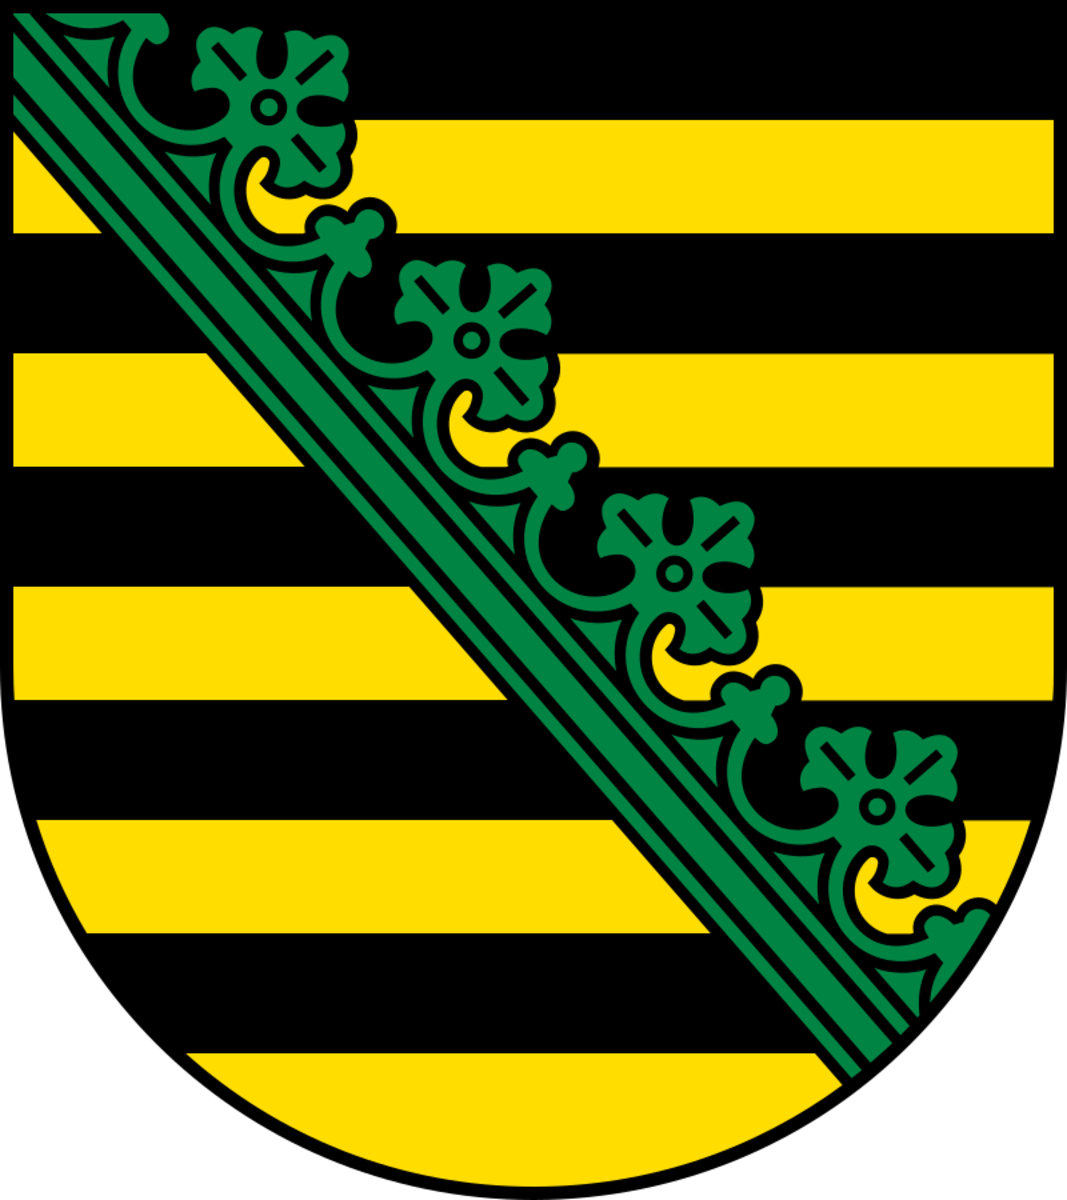 The Ernestine line of the House of Wettin used this coat of arms.